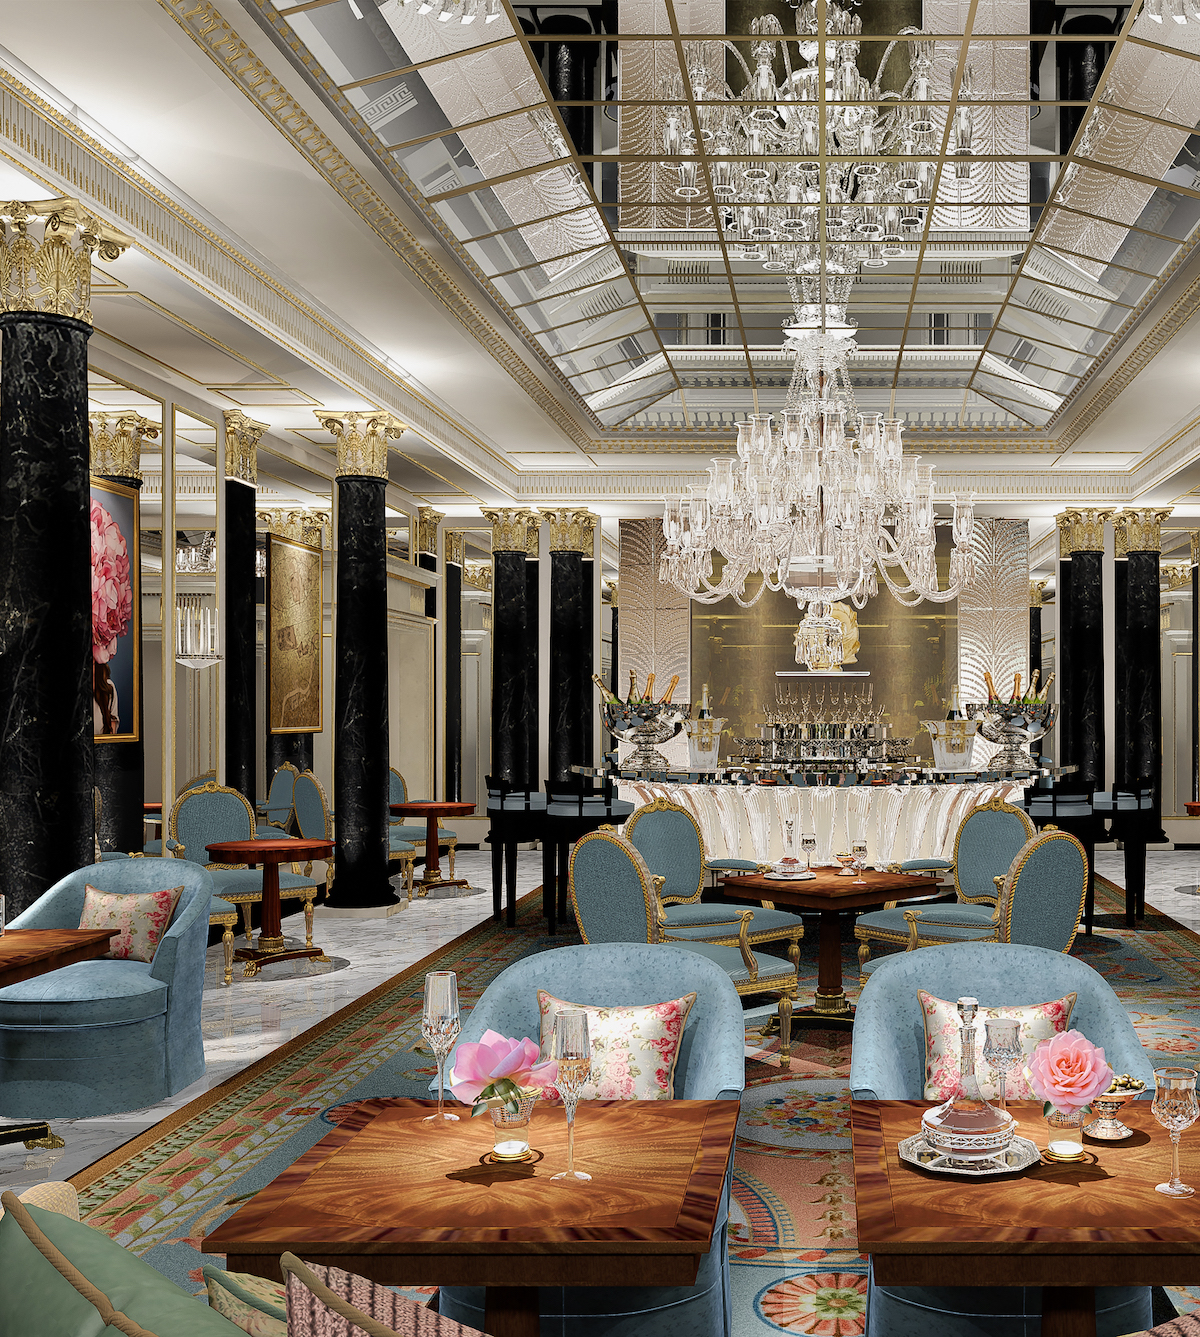 Image caption: The Dorchester rendering of the Promenade Pierre-Yves Rochon bar.  |  Image credit: Dorchester Collection